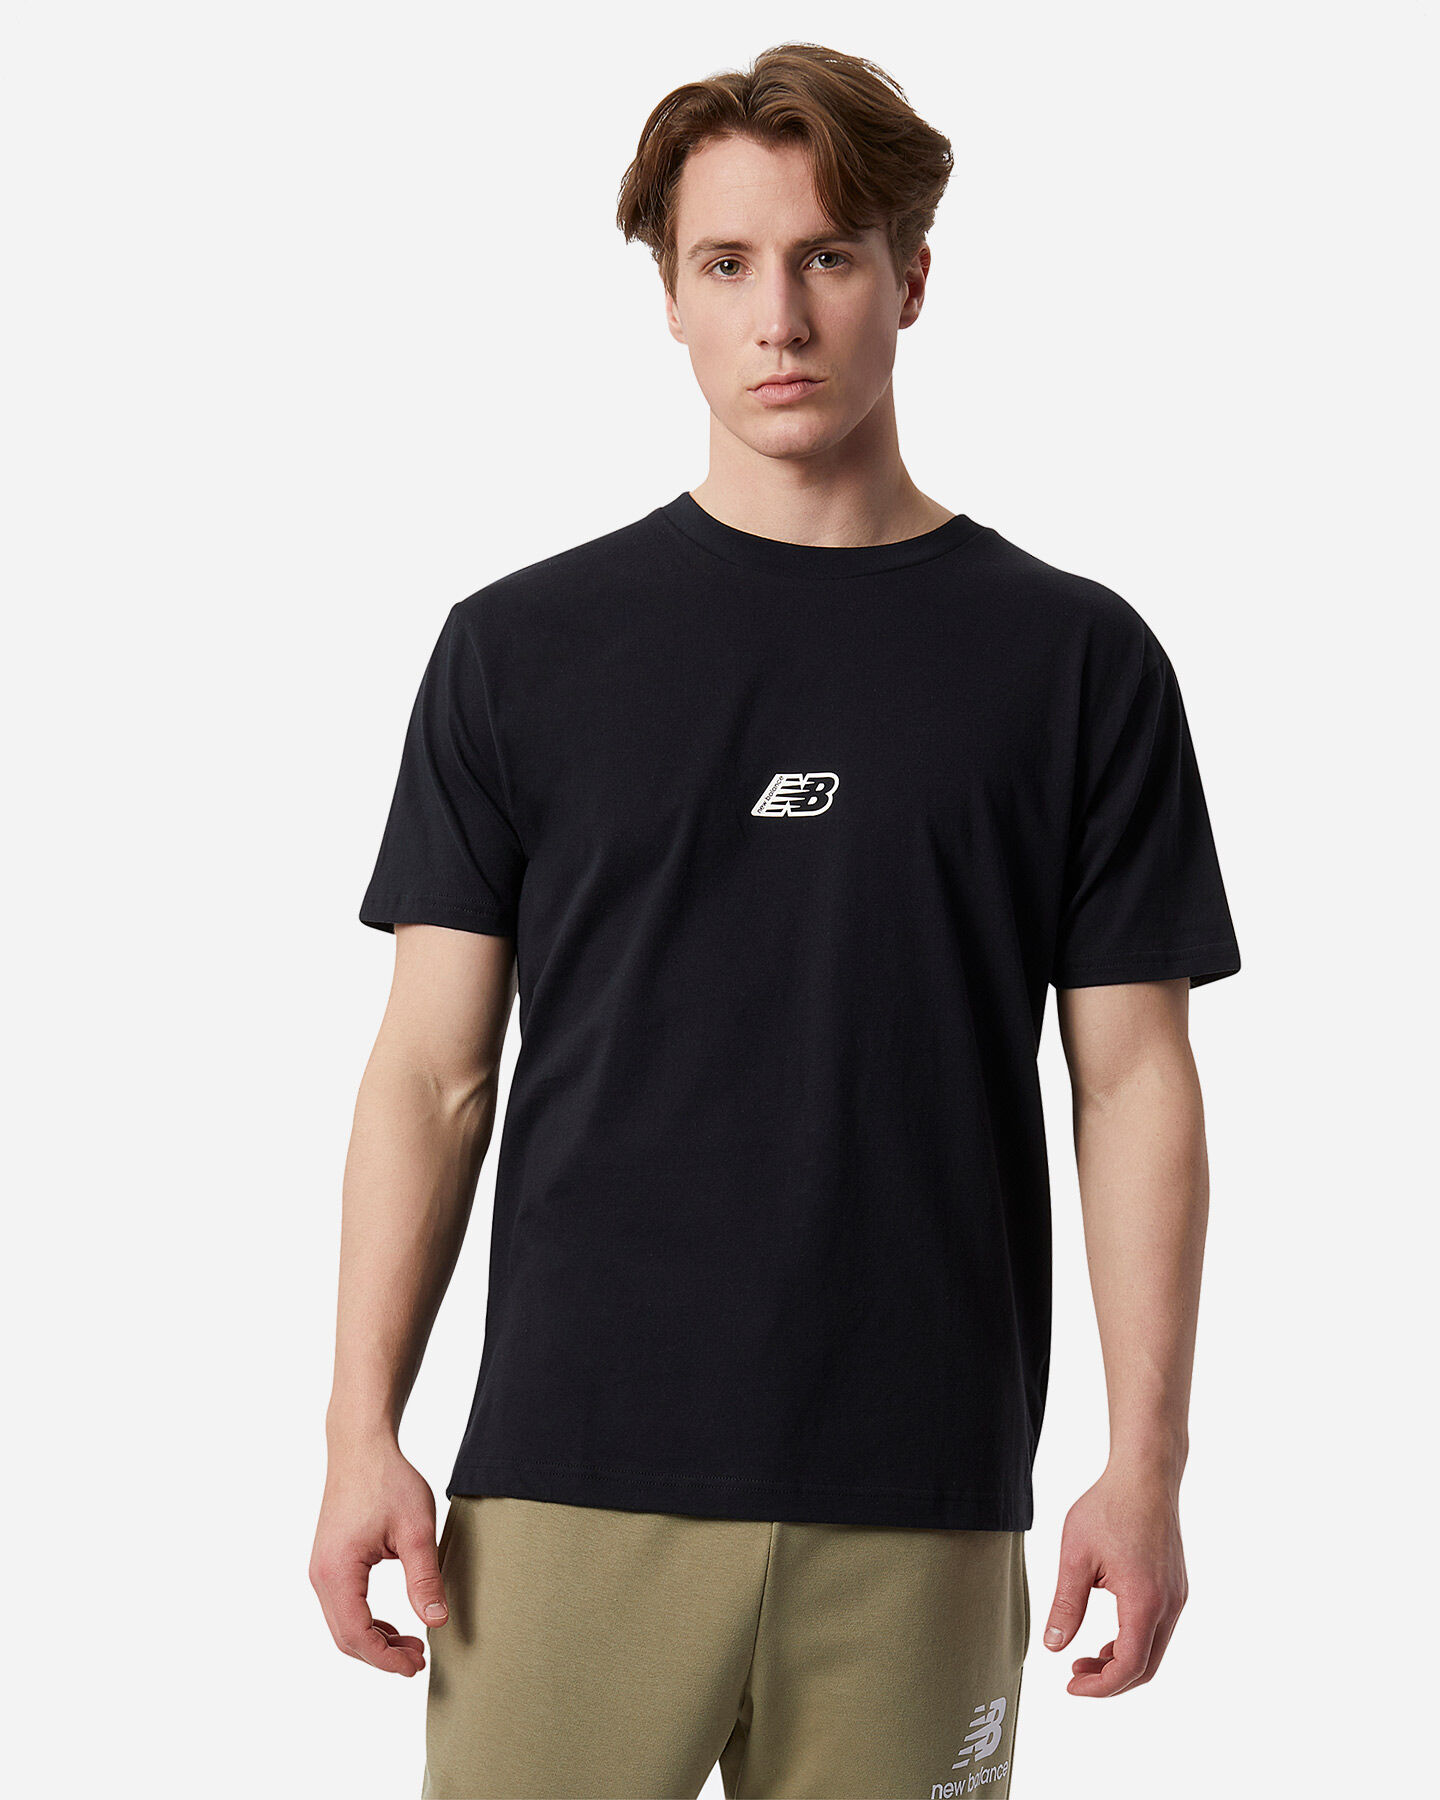  T-Shirt NEW BALANCE ESSENTIAL GRAPHIC M S5472706|-|S* scatto 0